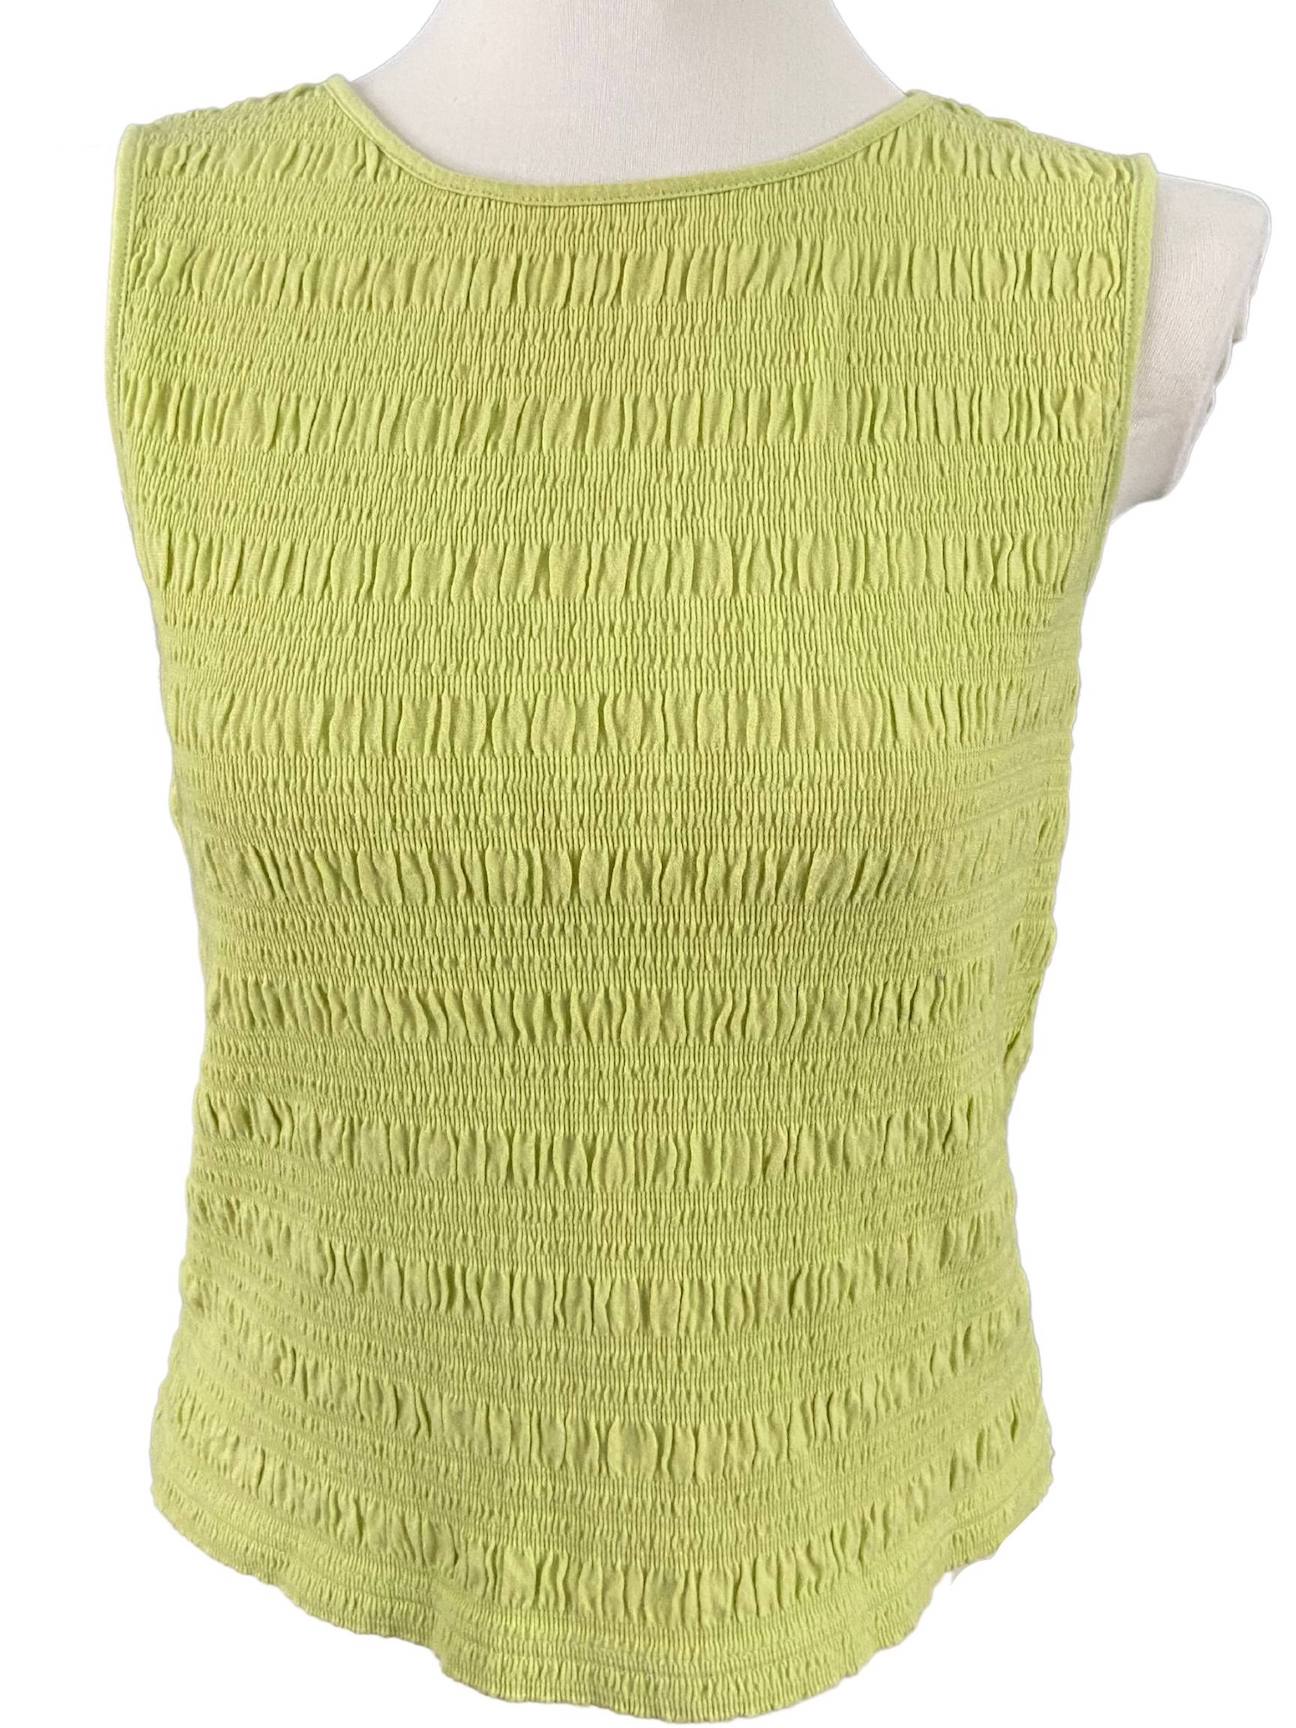 Warm Spring TALBOTS chartreuse stretch top